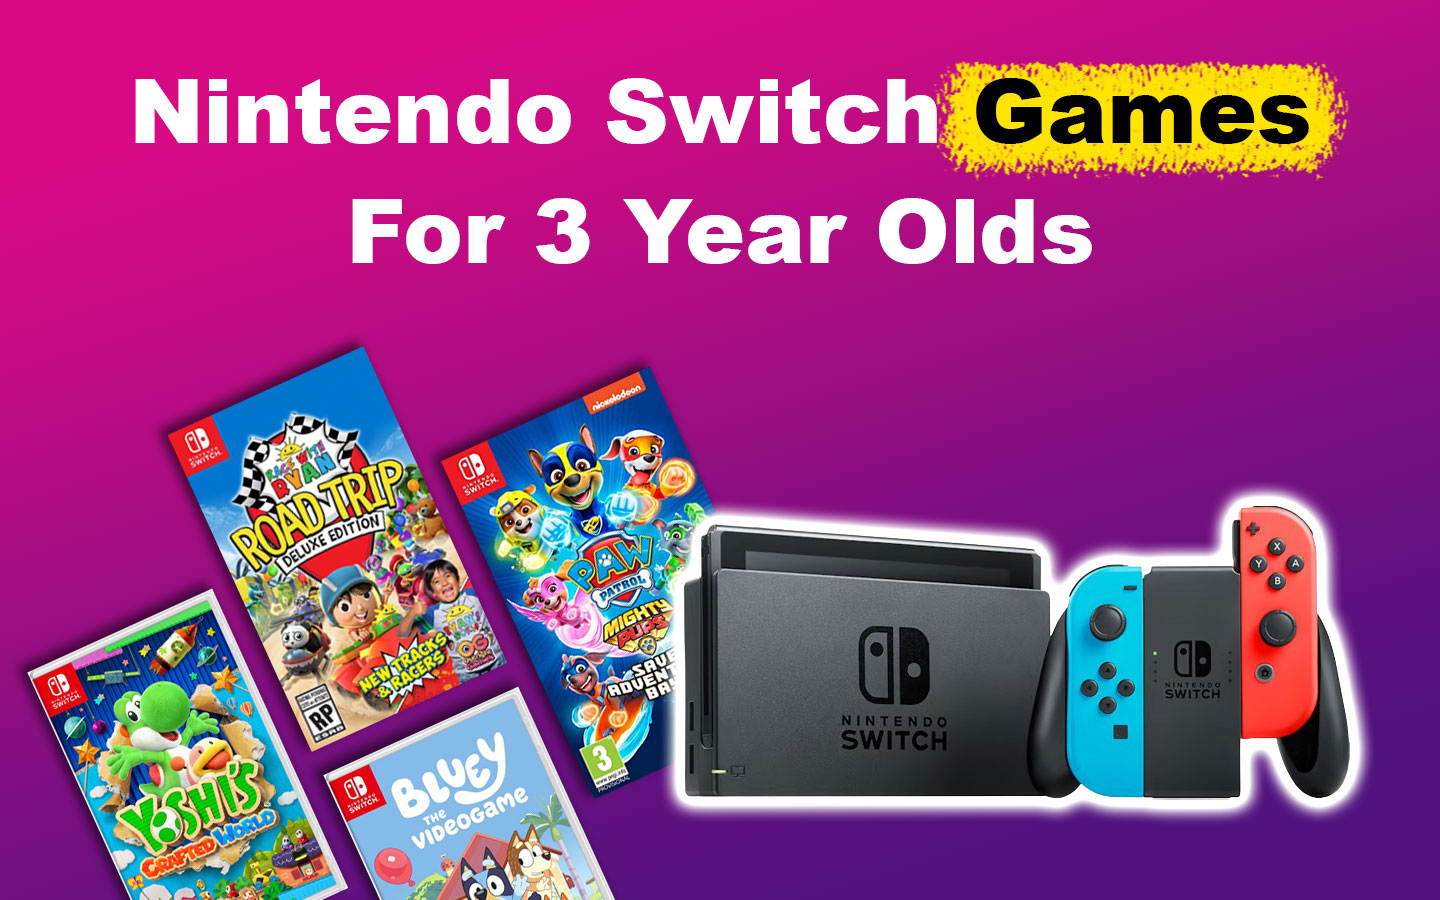 Nintendo Switch Games for 3 Year Olds